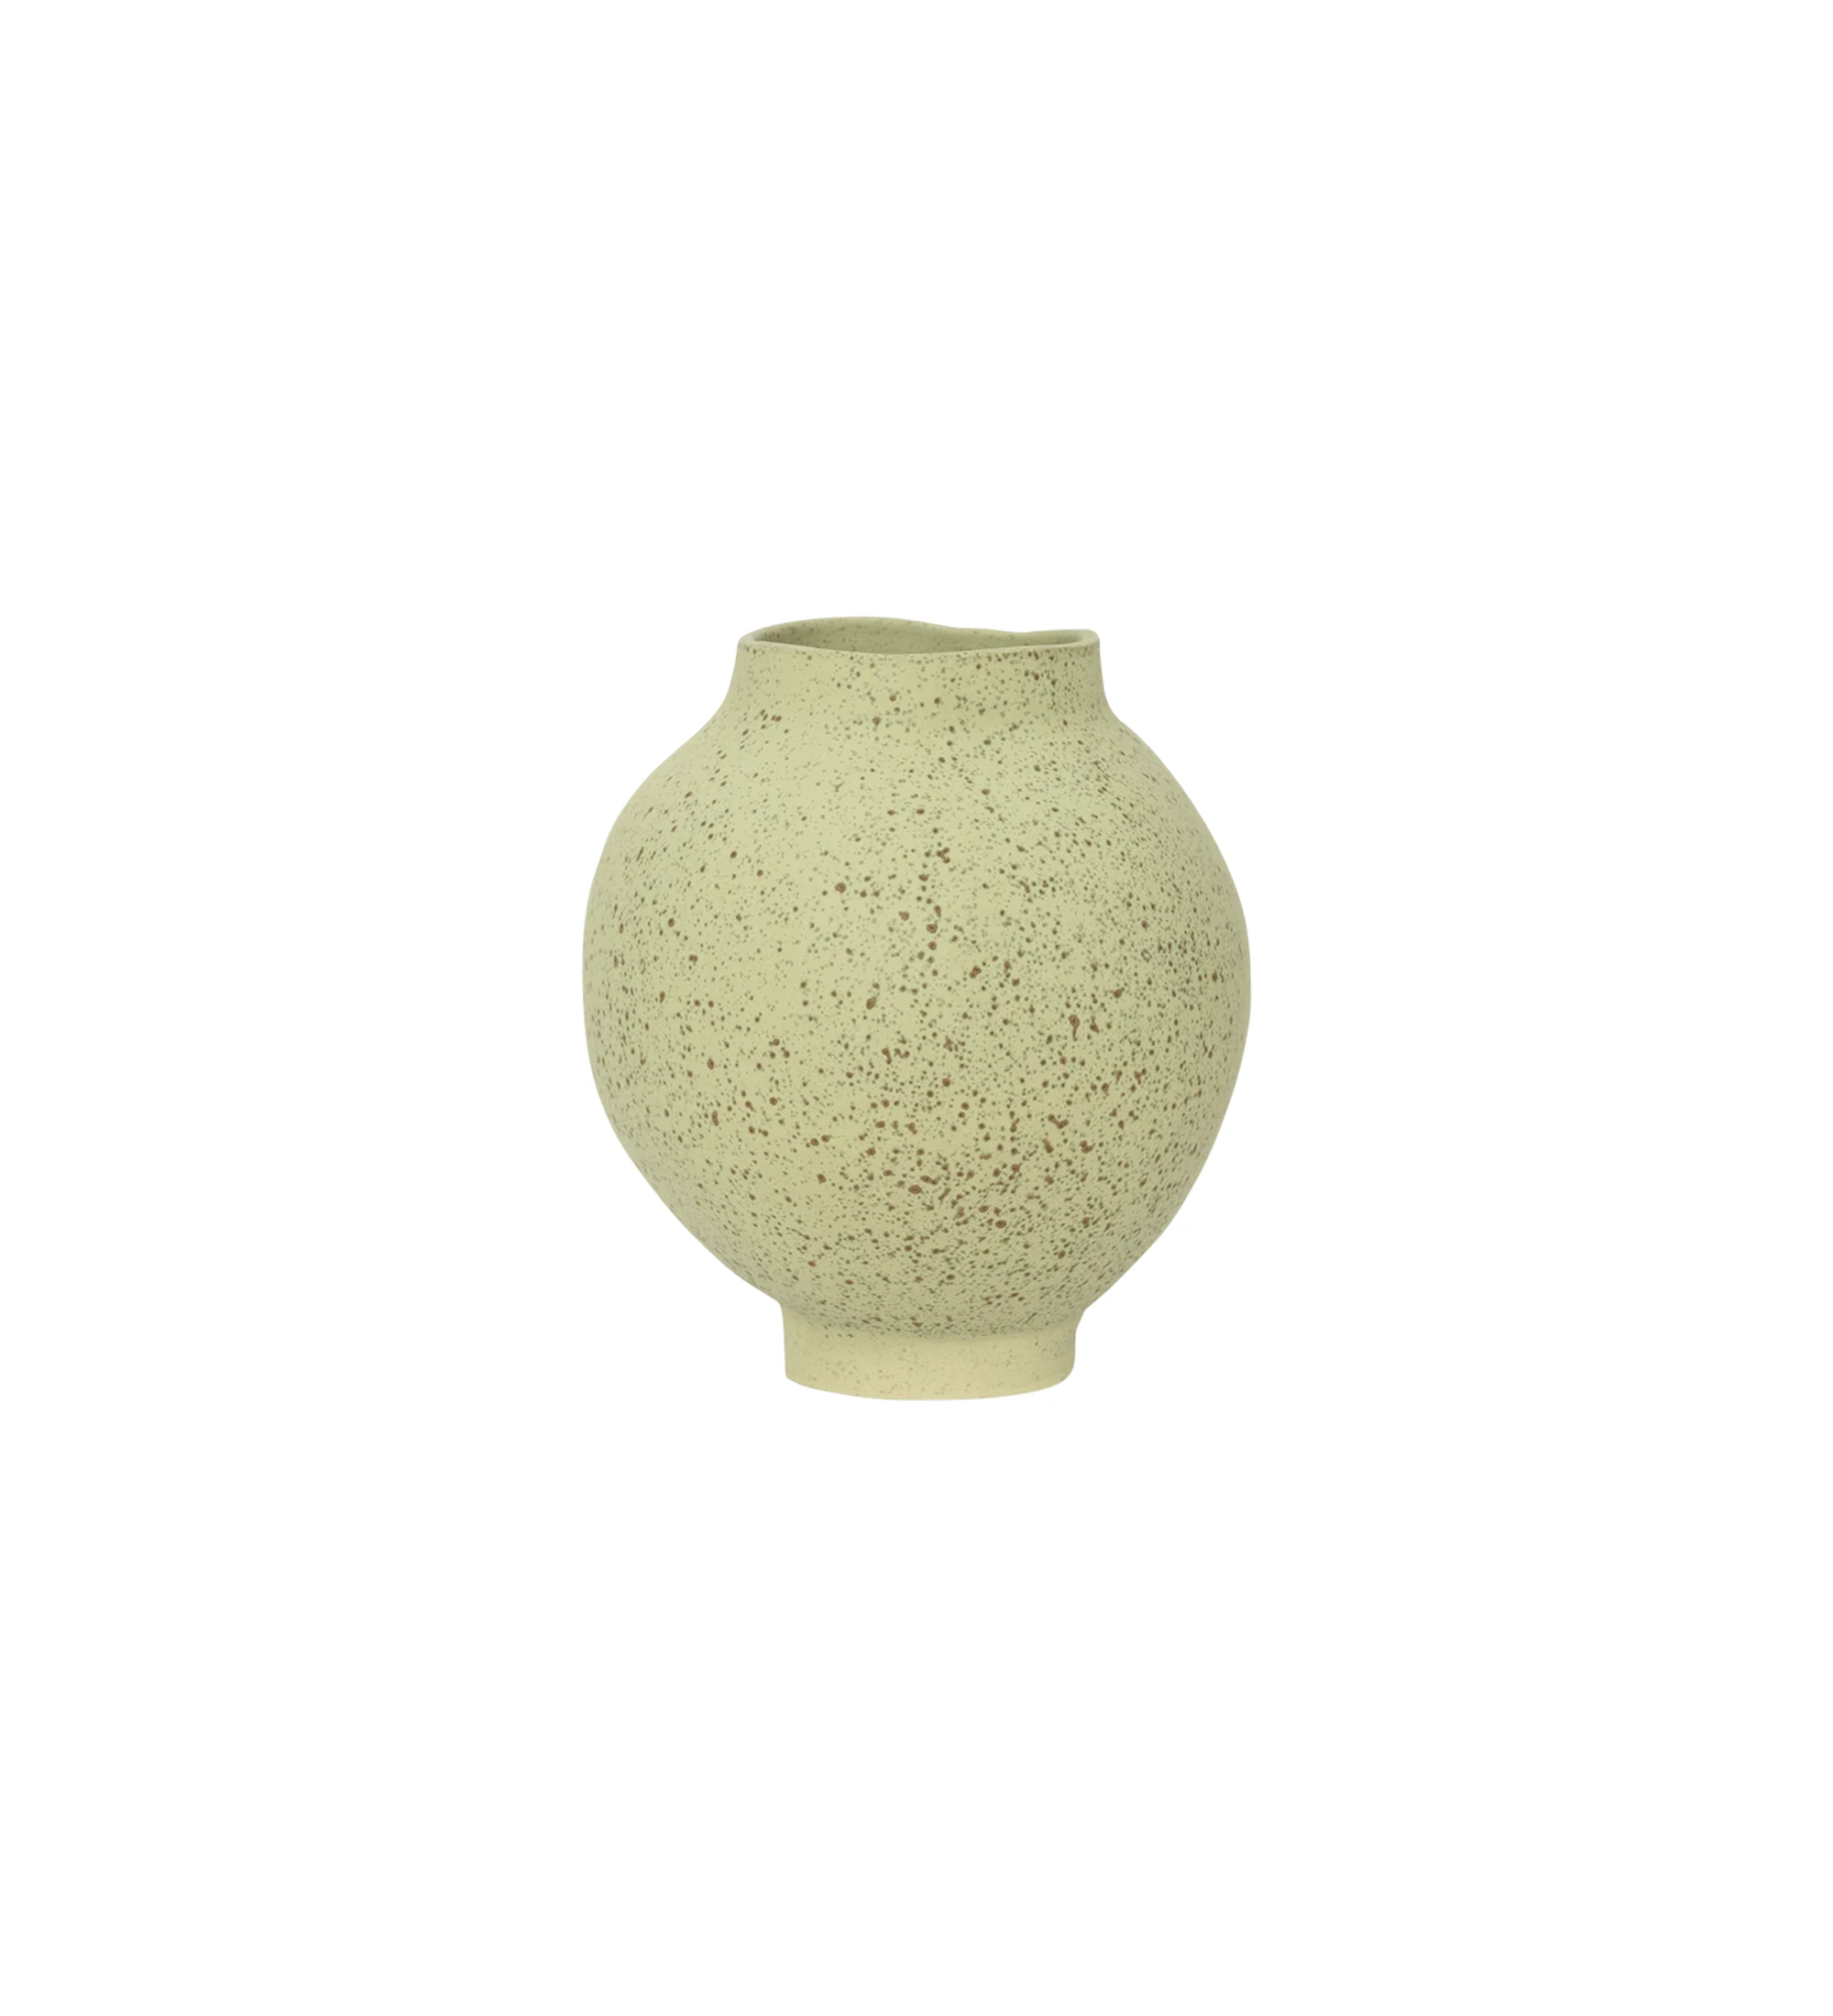 Handmade vase with ceramic structure, has an ultra-matte dry finish with refined blond green stains.